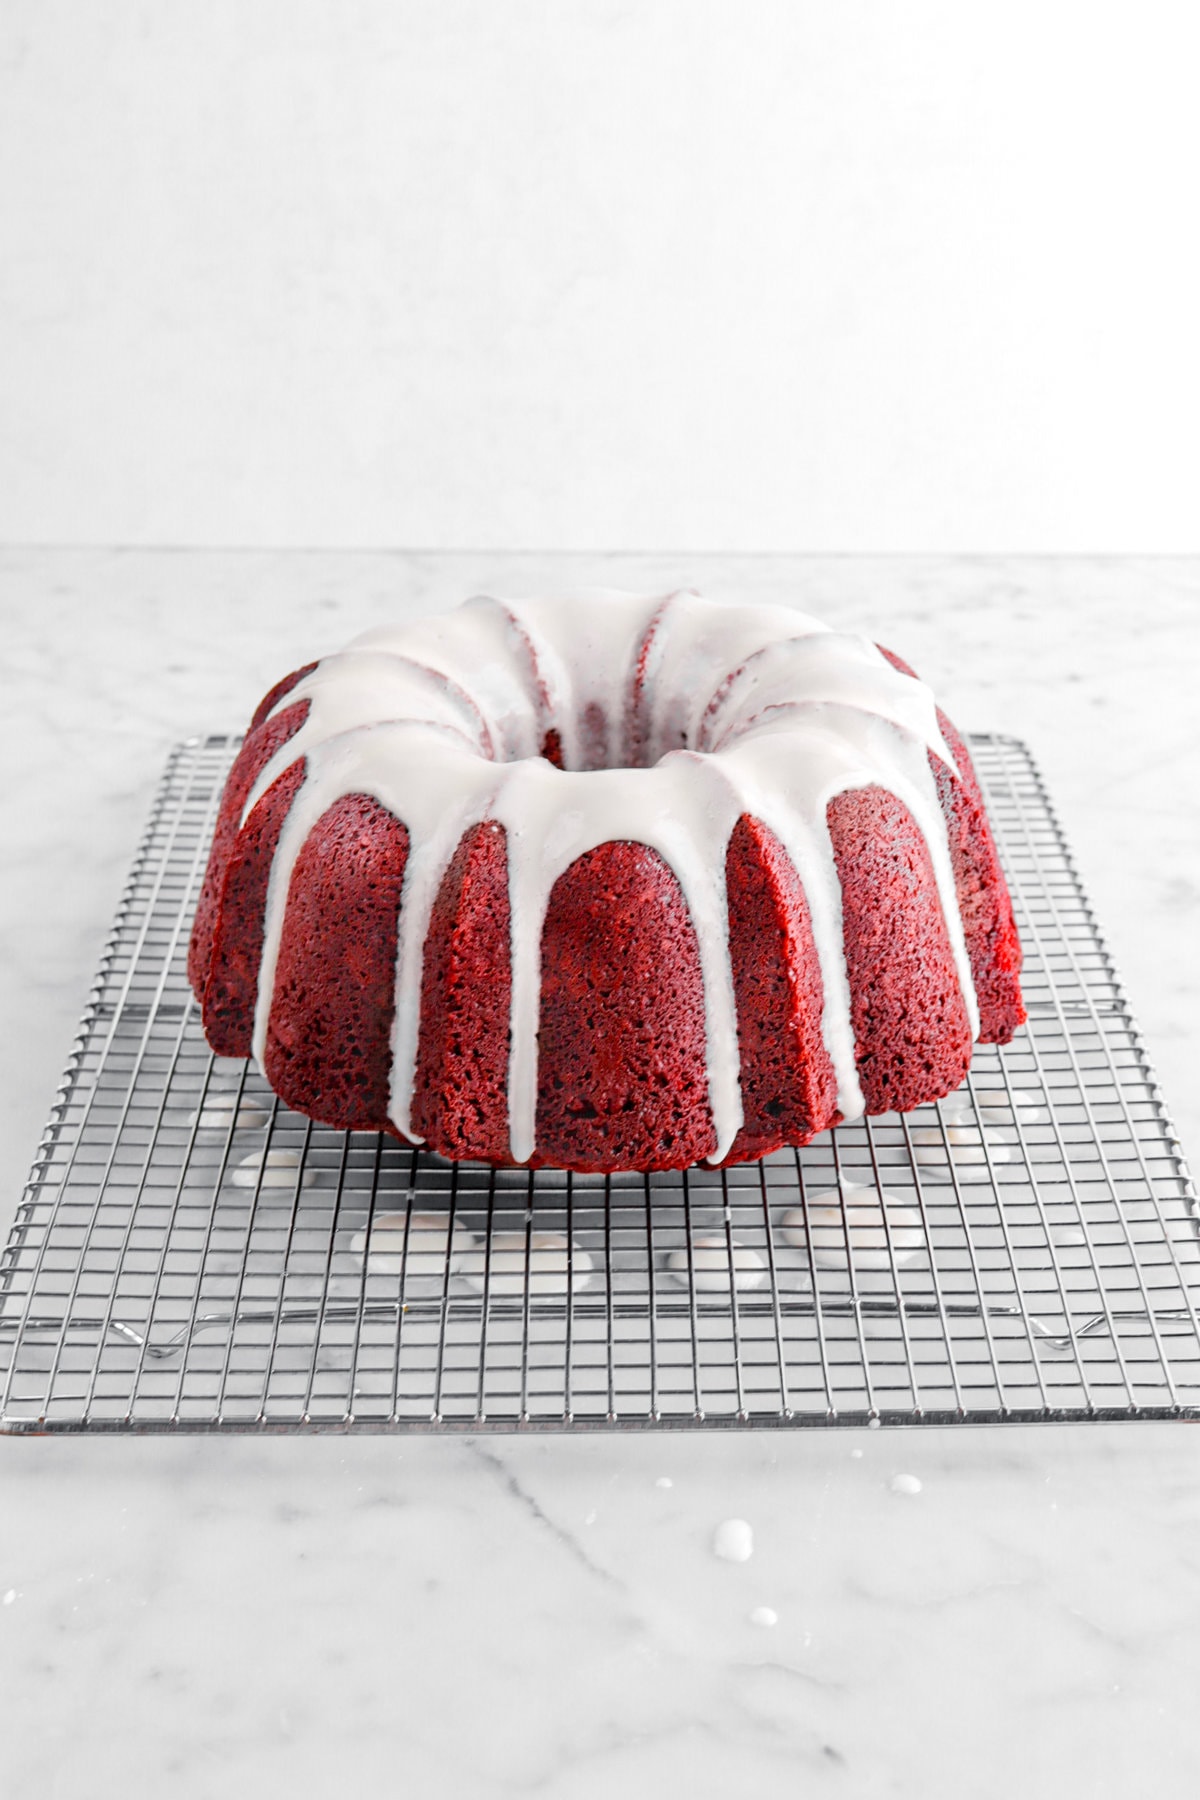 cream cheese icing added on top of red velvet cake.